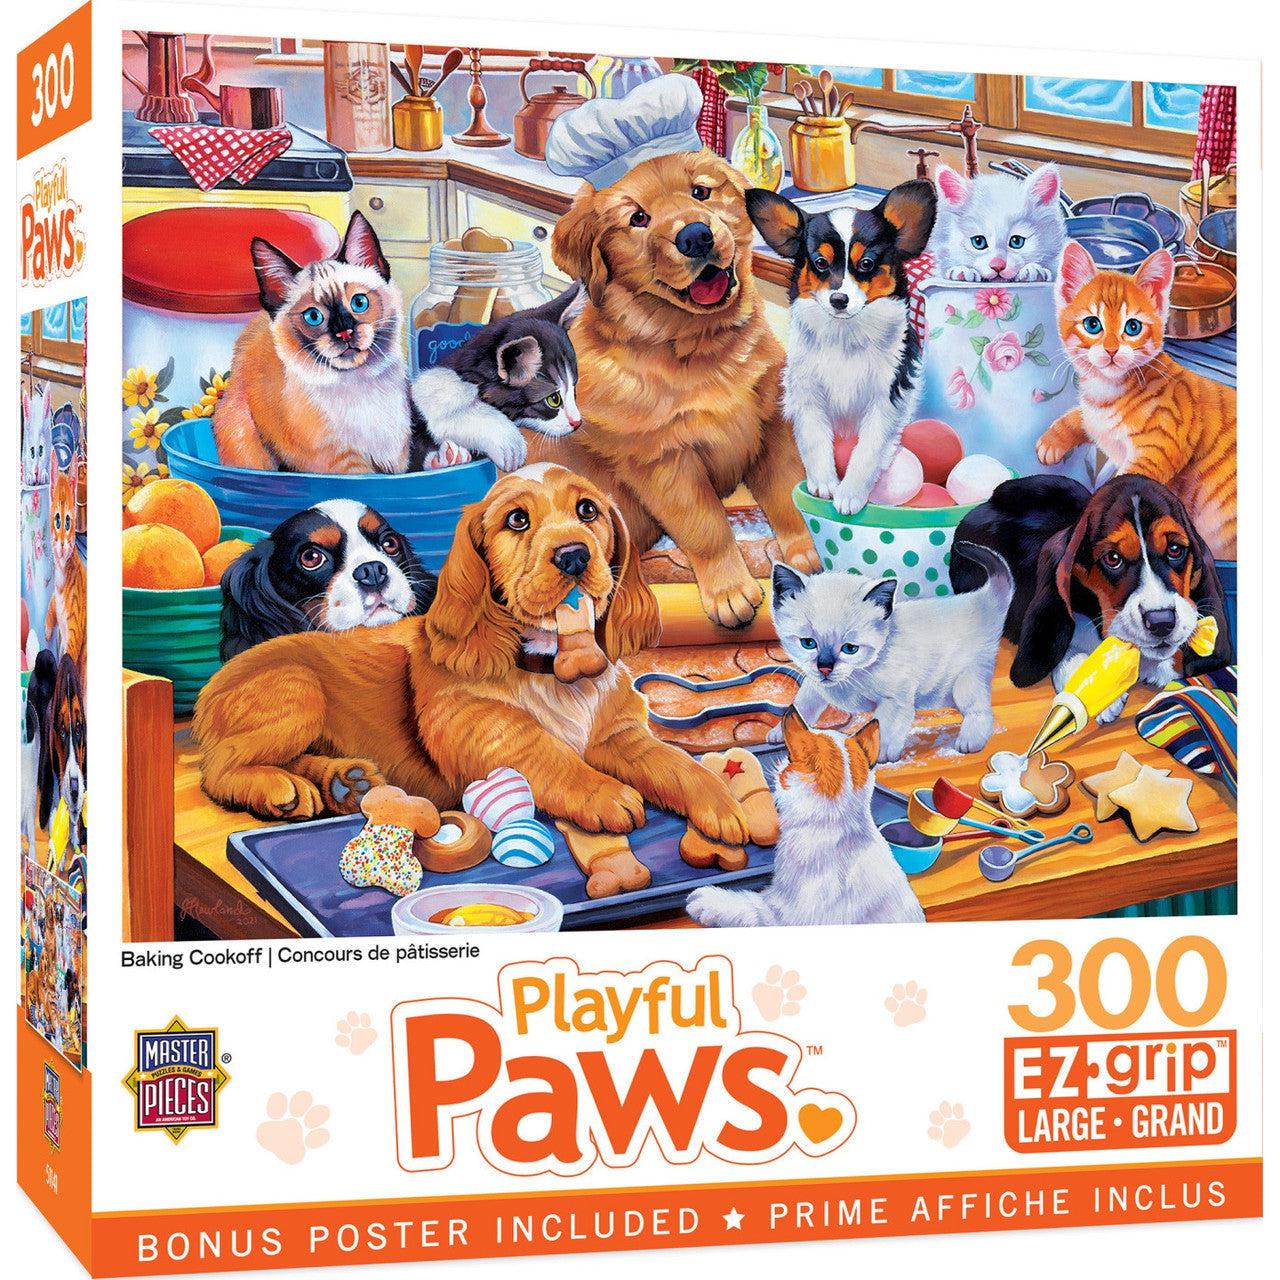 MasterPieces-Playful Paws - Baking Cookoff - 300 Piece EzGrip Puzzle-32226-Legacy Toys